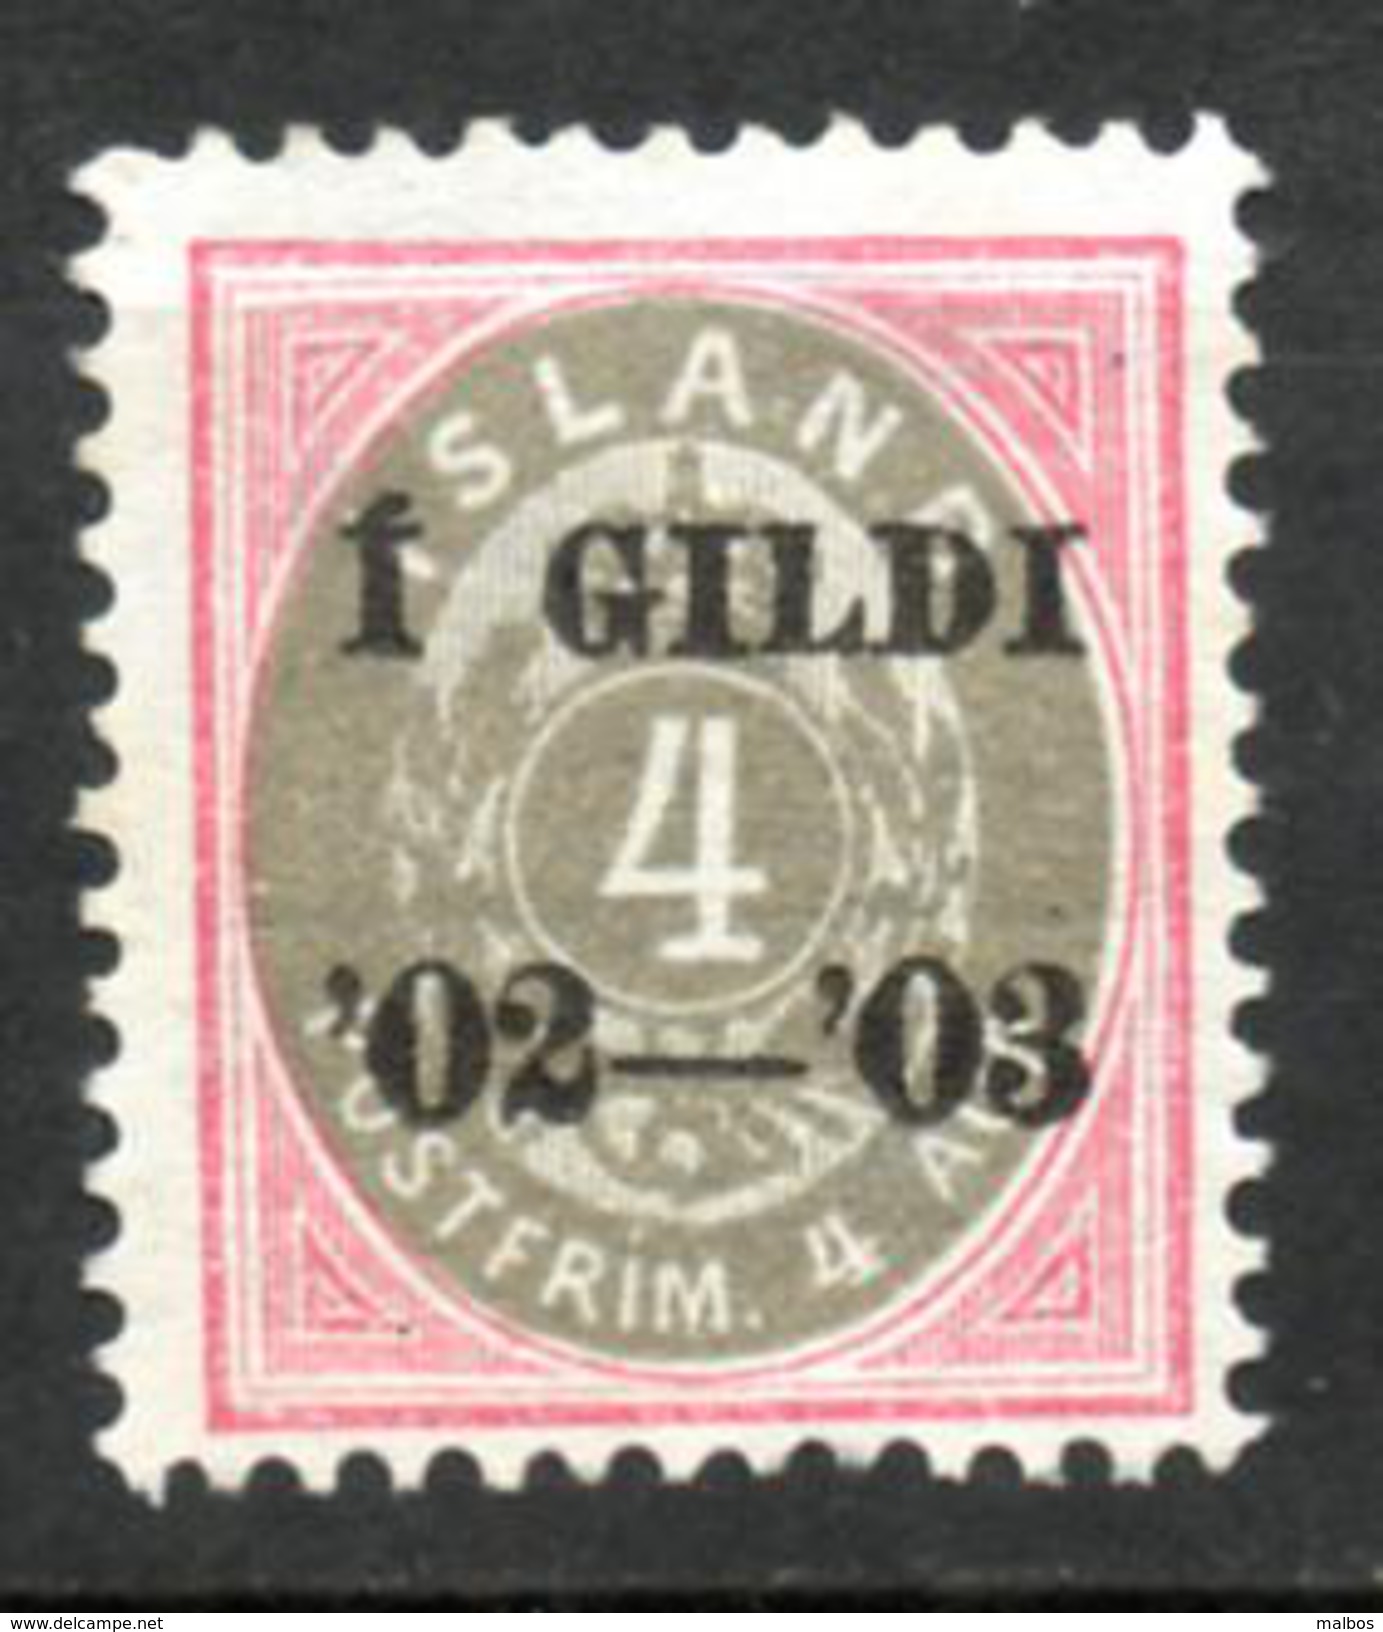 ISLAND  1902  (*)   Y&T N° 24   - P12.5   - Sans Gomme - Without Gum - Neufs